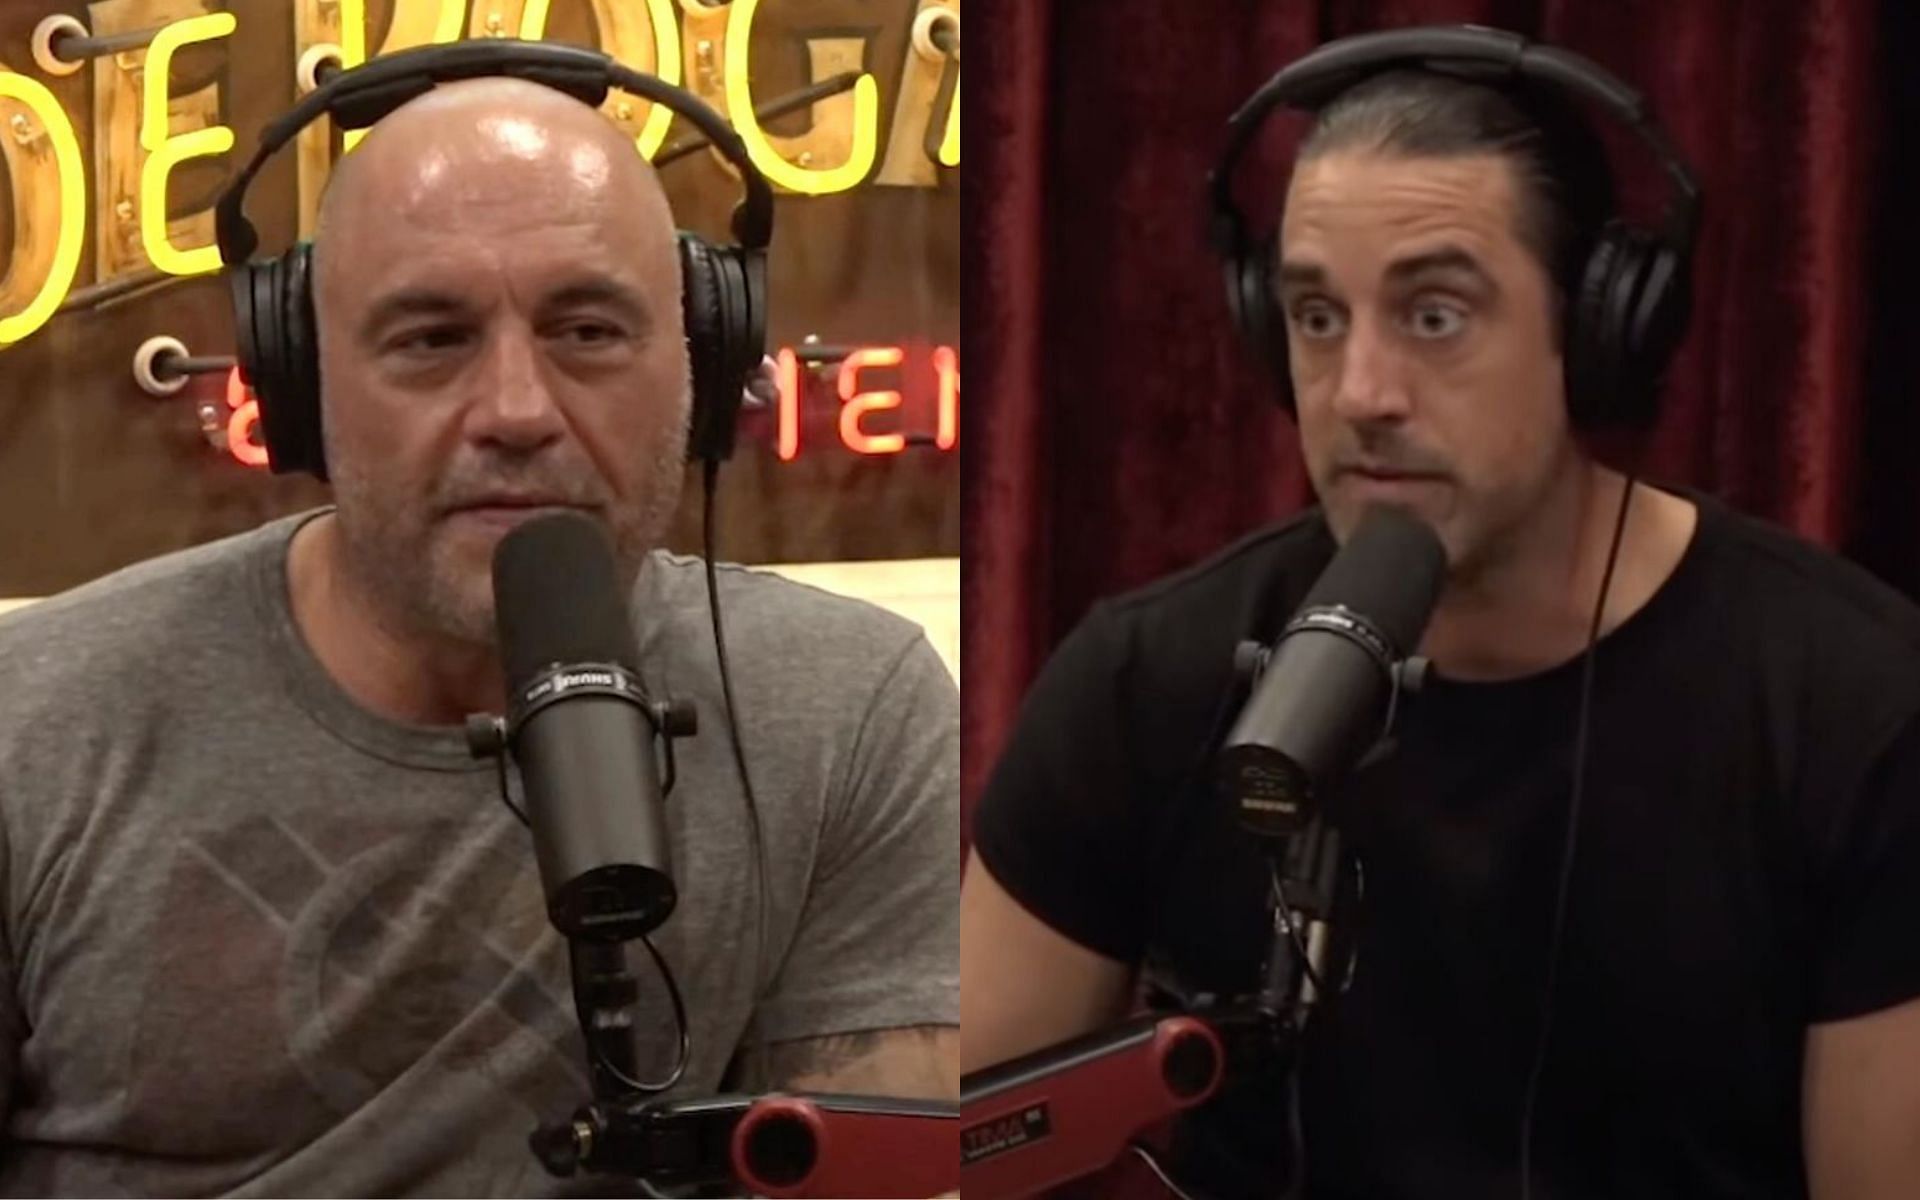 Joe Rogan (left) and Aaron Rodgers (right) [Photo credit: Powerful JRE on YouTube]